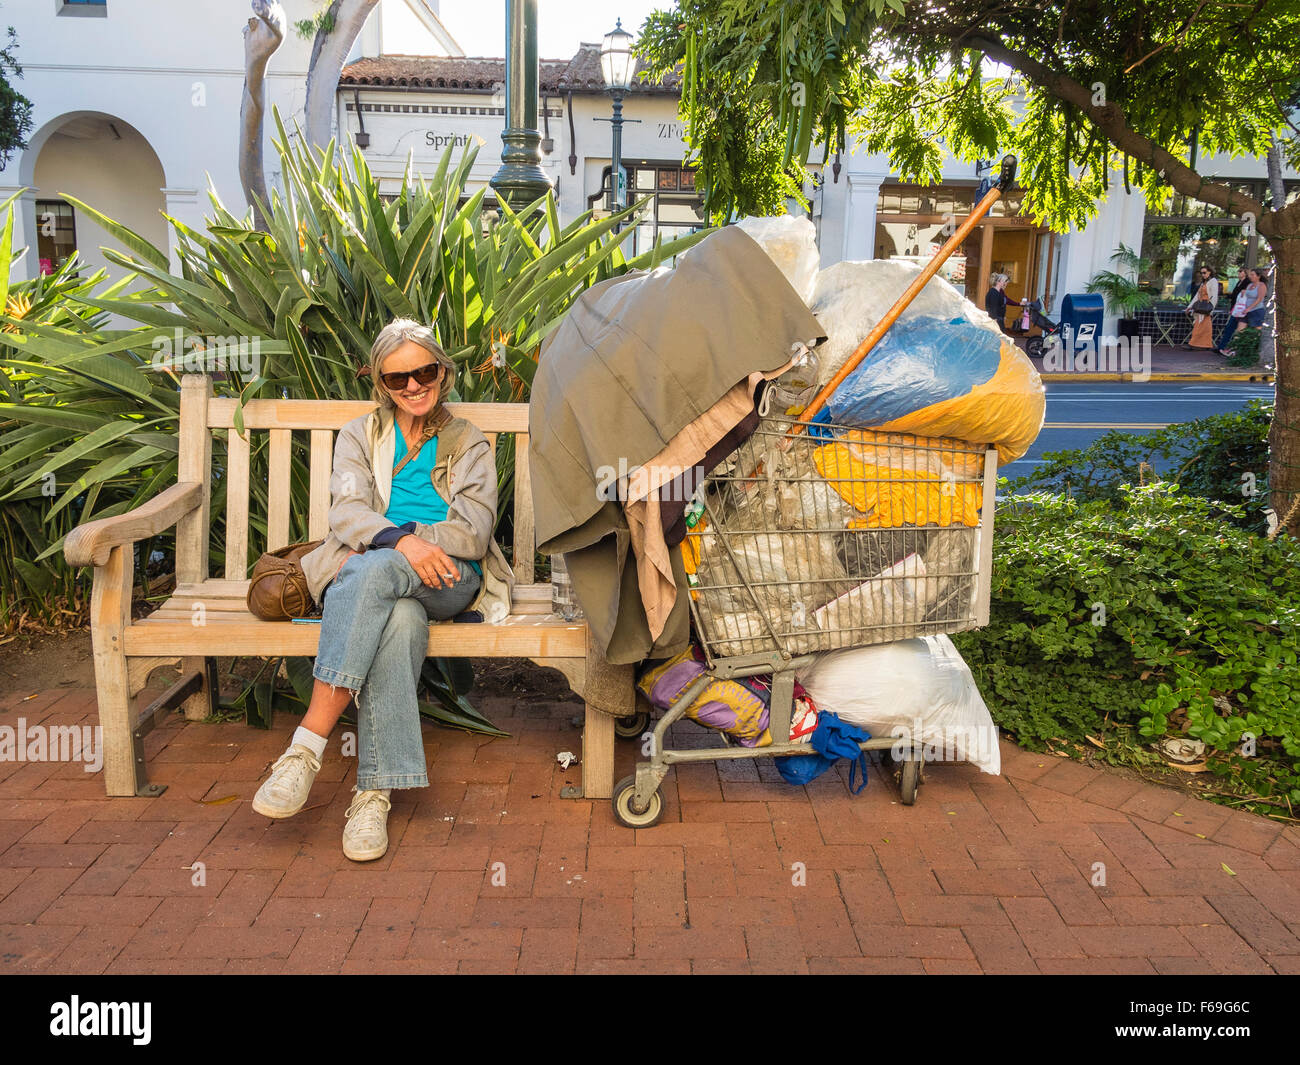 A senior citizen bag lady wearing sunglasses smiles ans sits on a public bench on State Street smoking a cigarette. Stock Photo